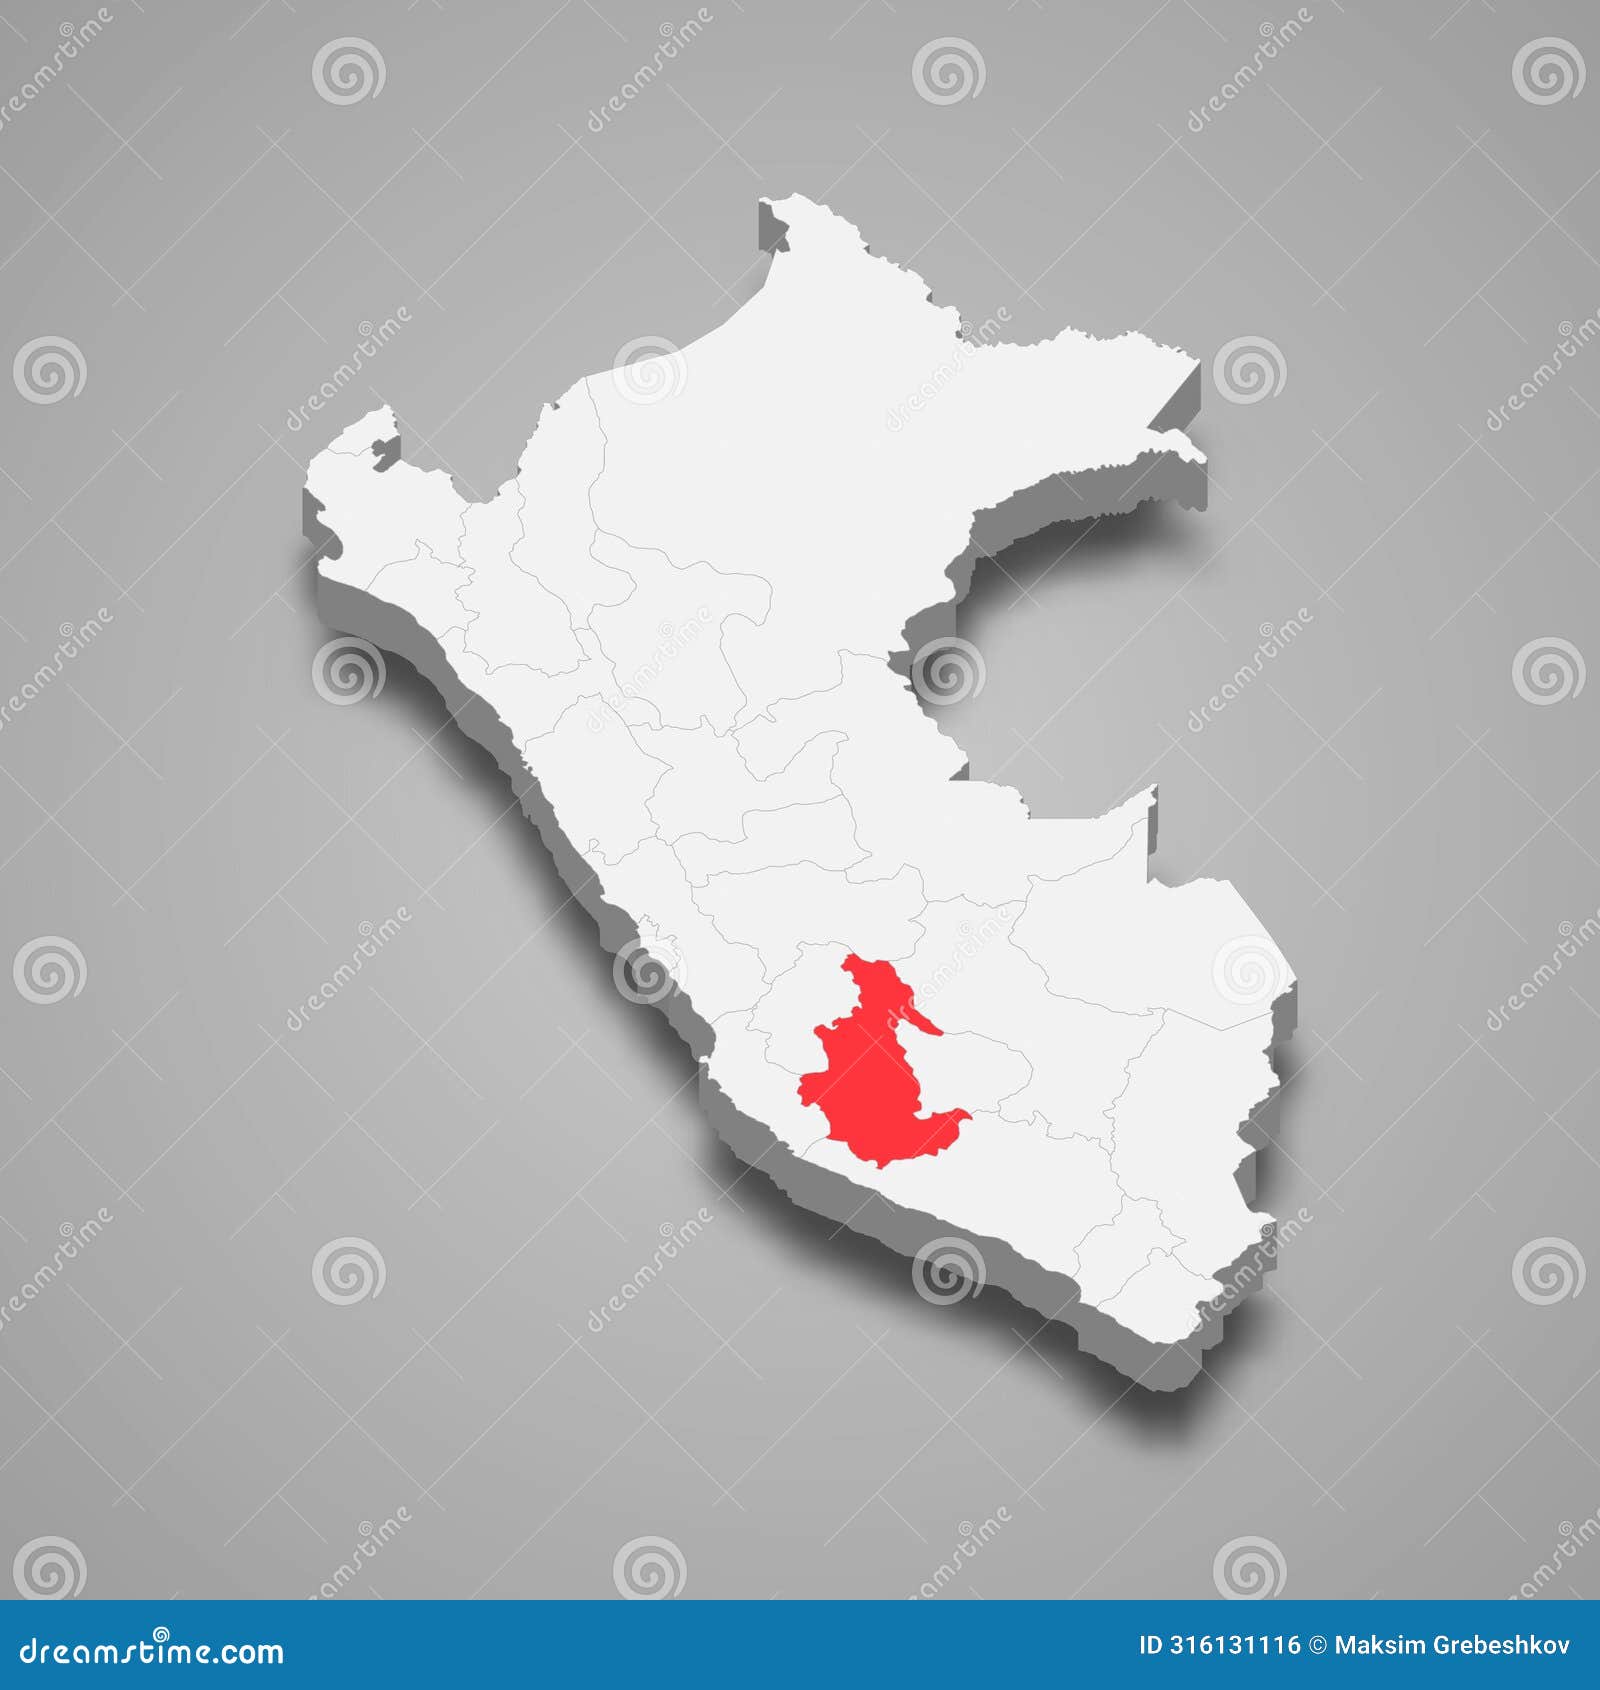 ayacucho department location within peru 3d map